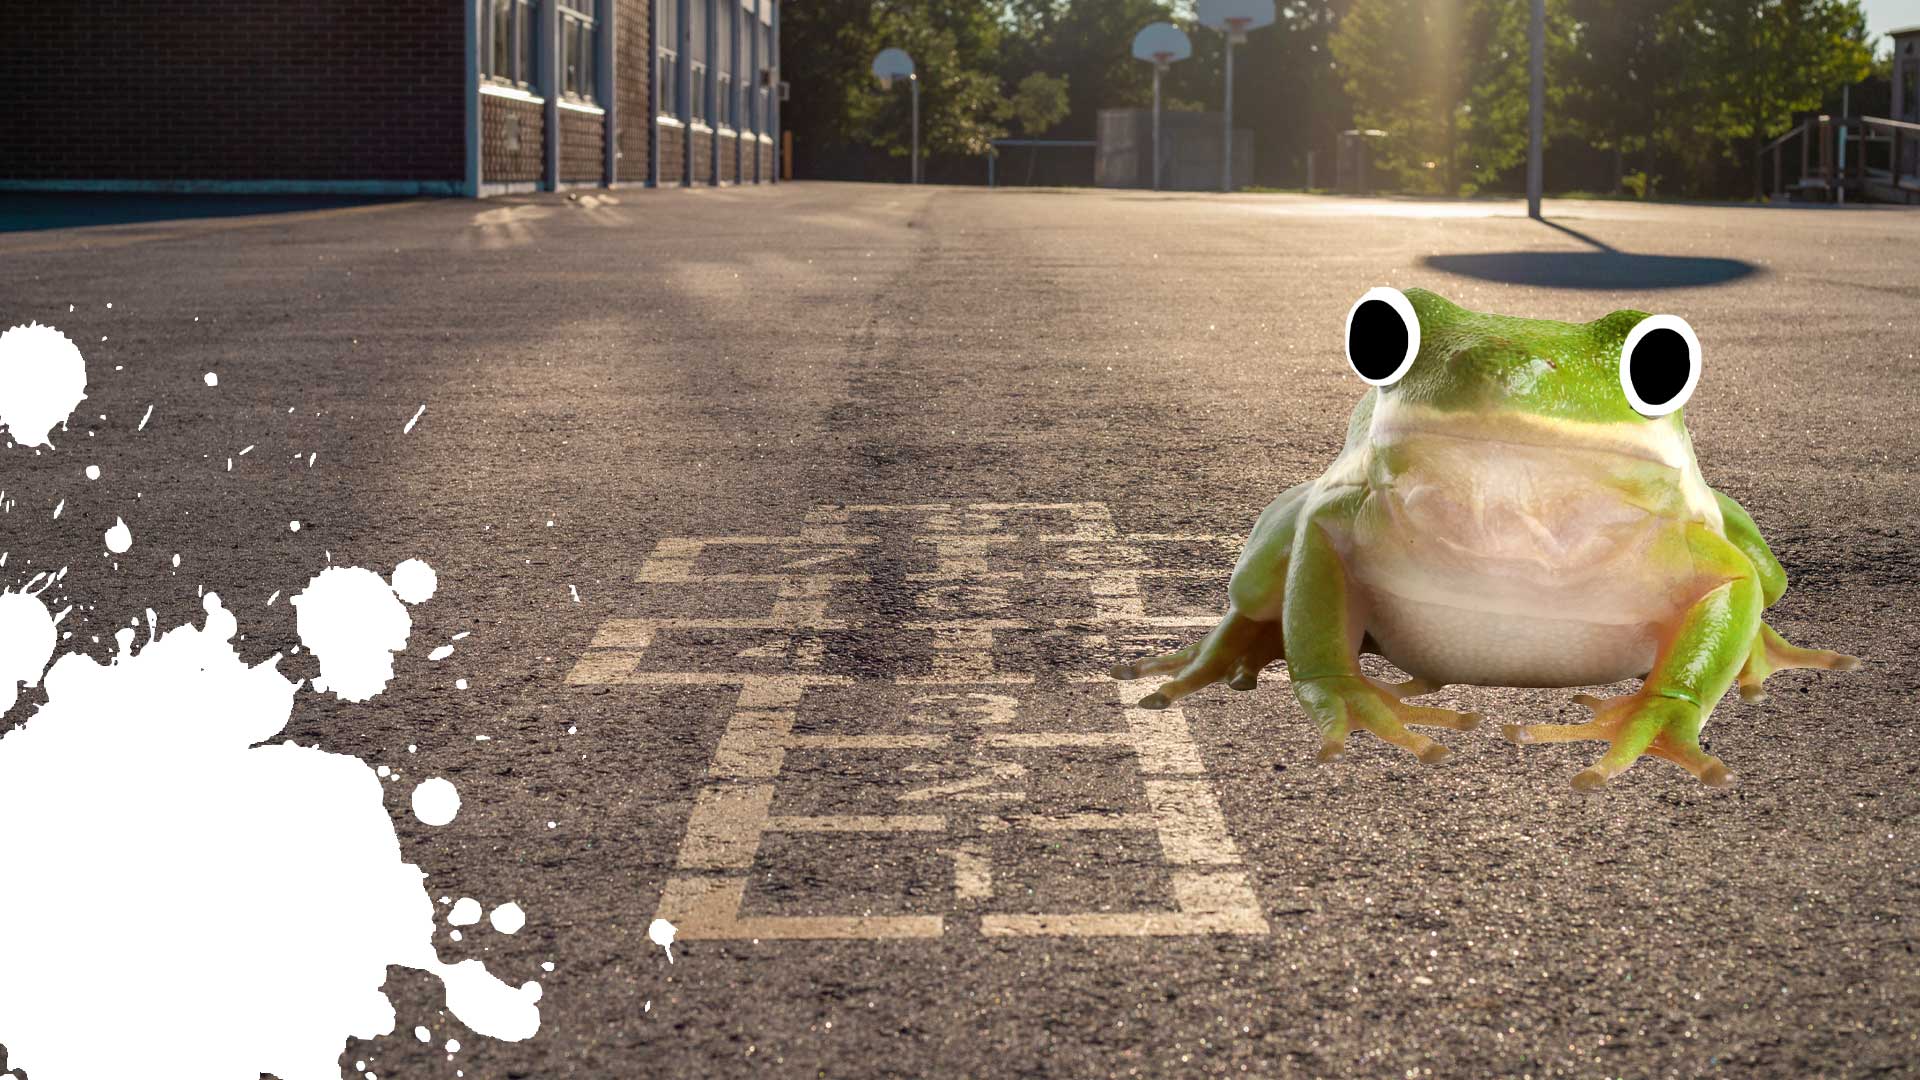 A frog in a school playground